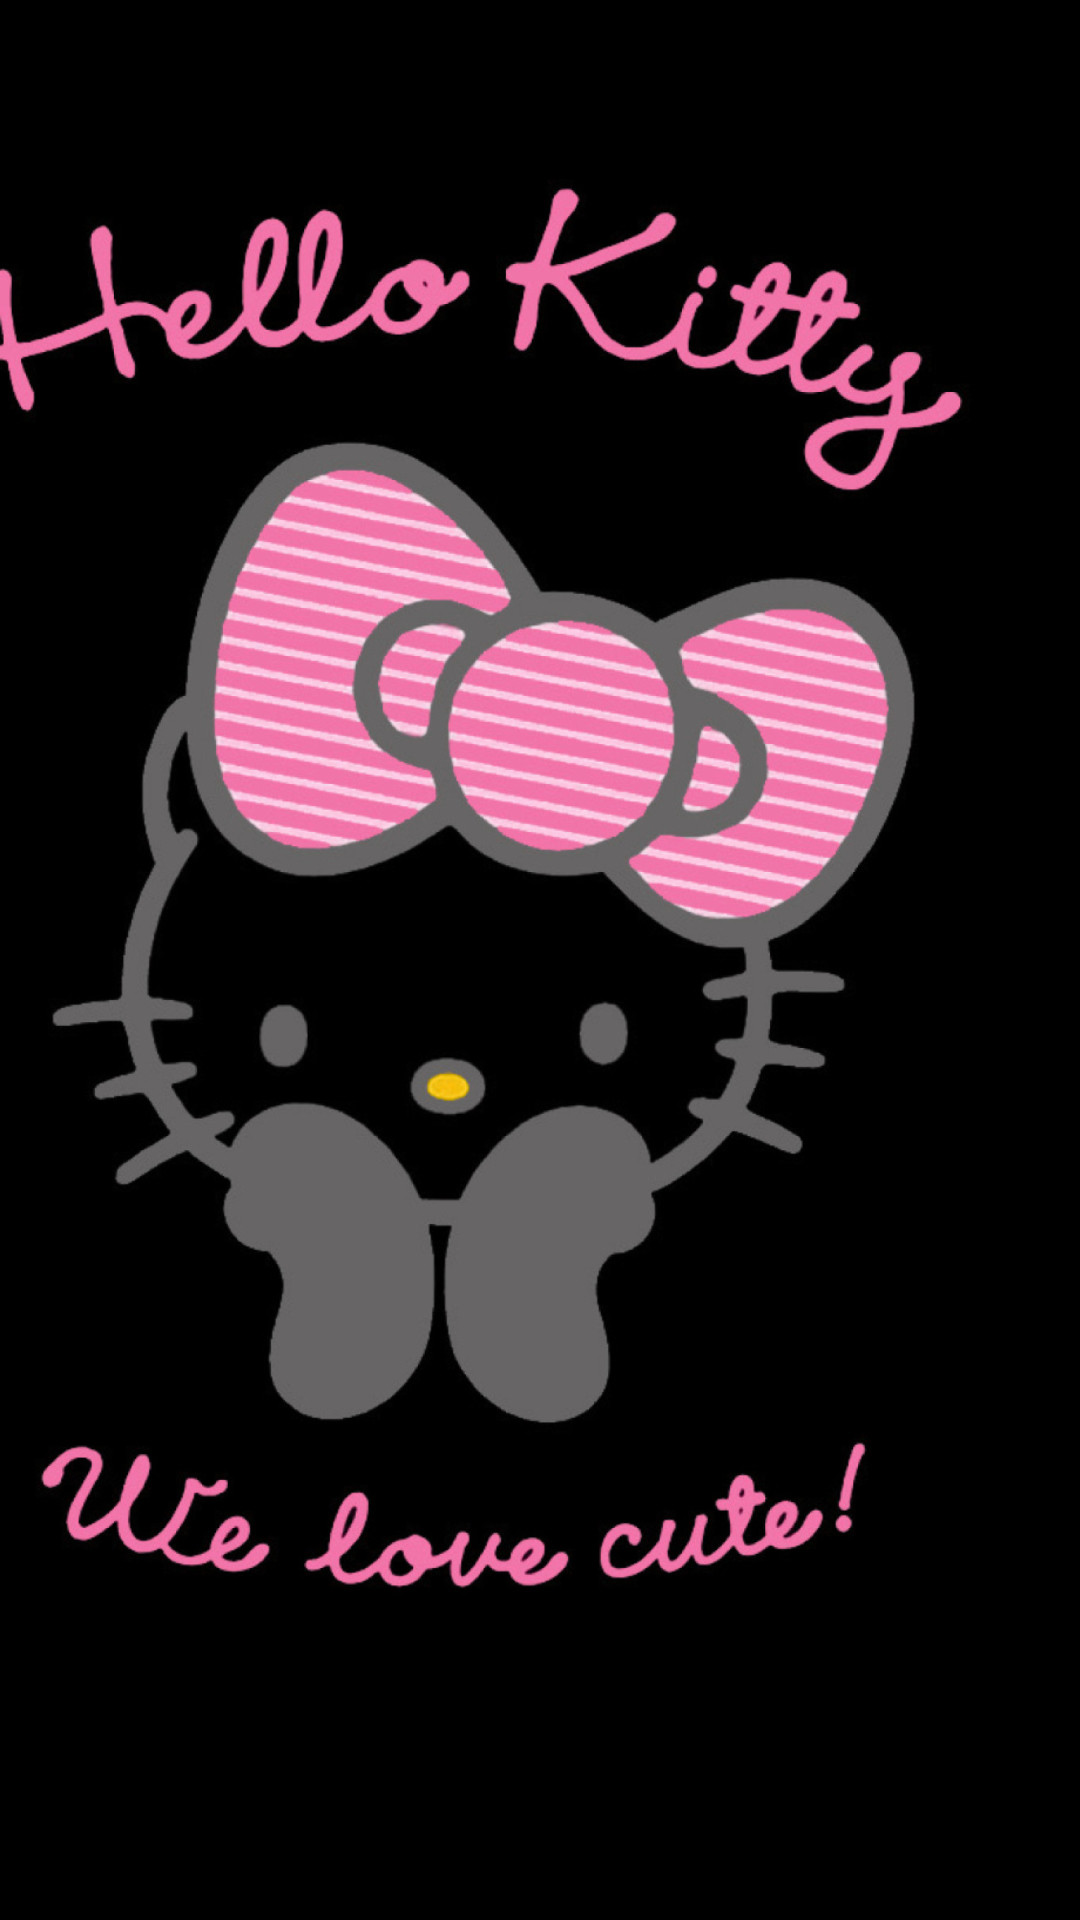 Cute Pink Wallpaper Hello Kitty : Hello Kitty Wallpaper Pink and Black